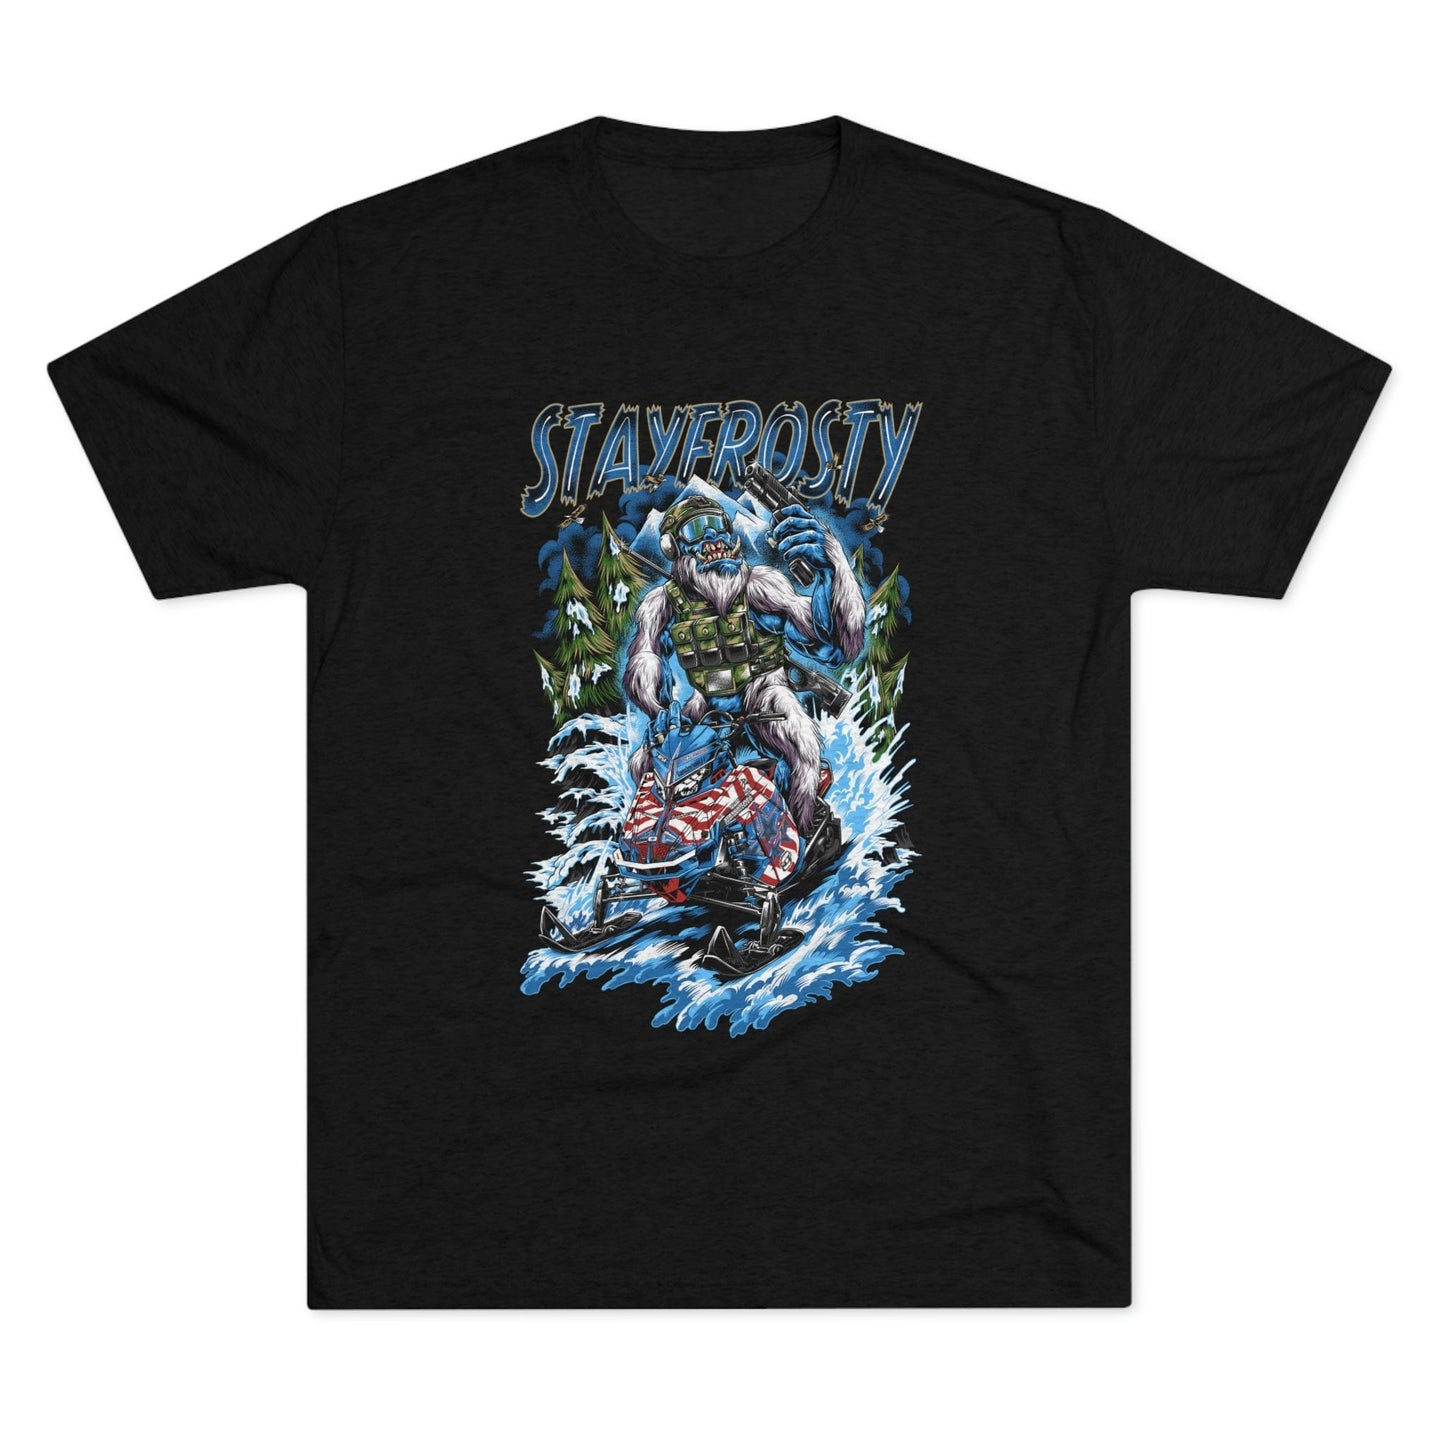 “Stay Frosty” AAHF/HC Collaboration Tee (Front)